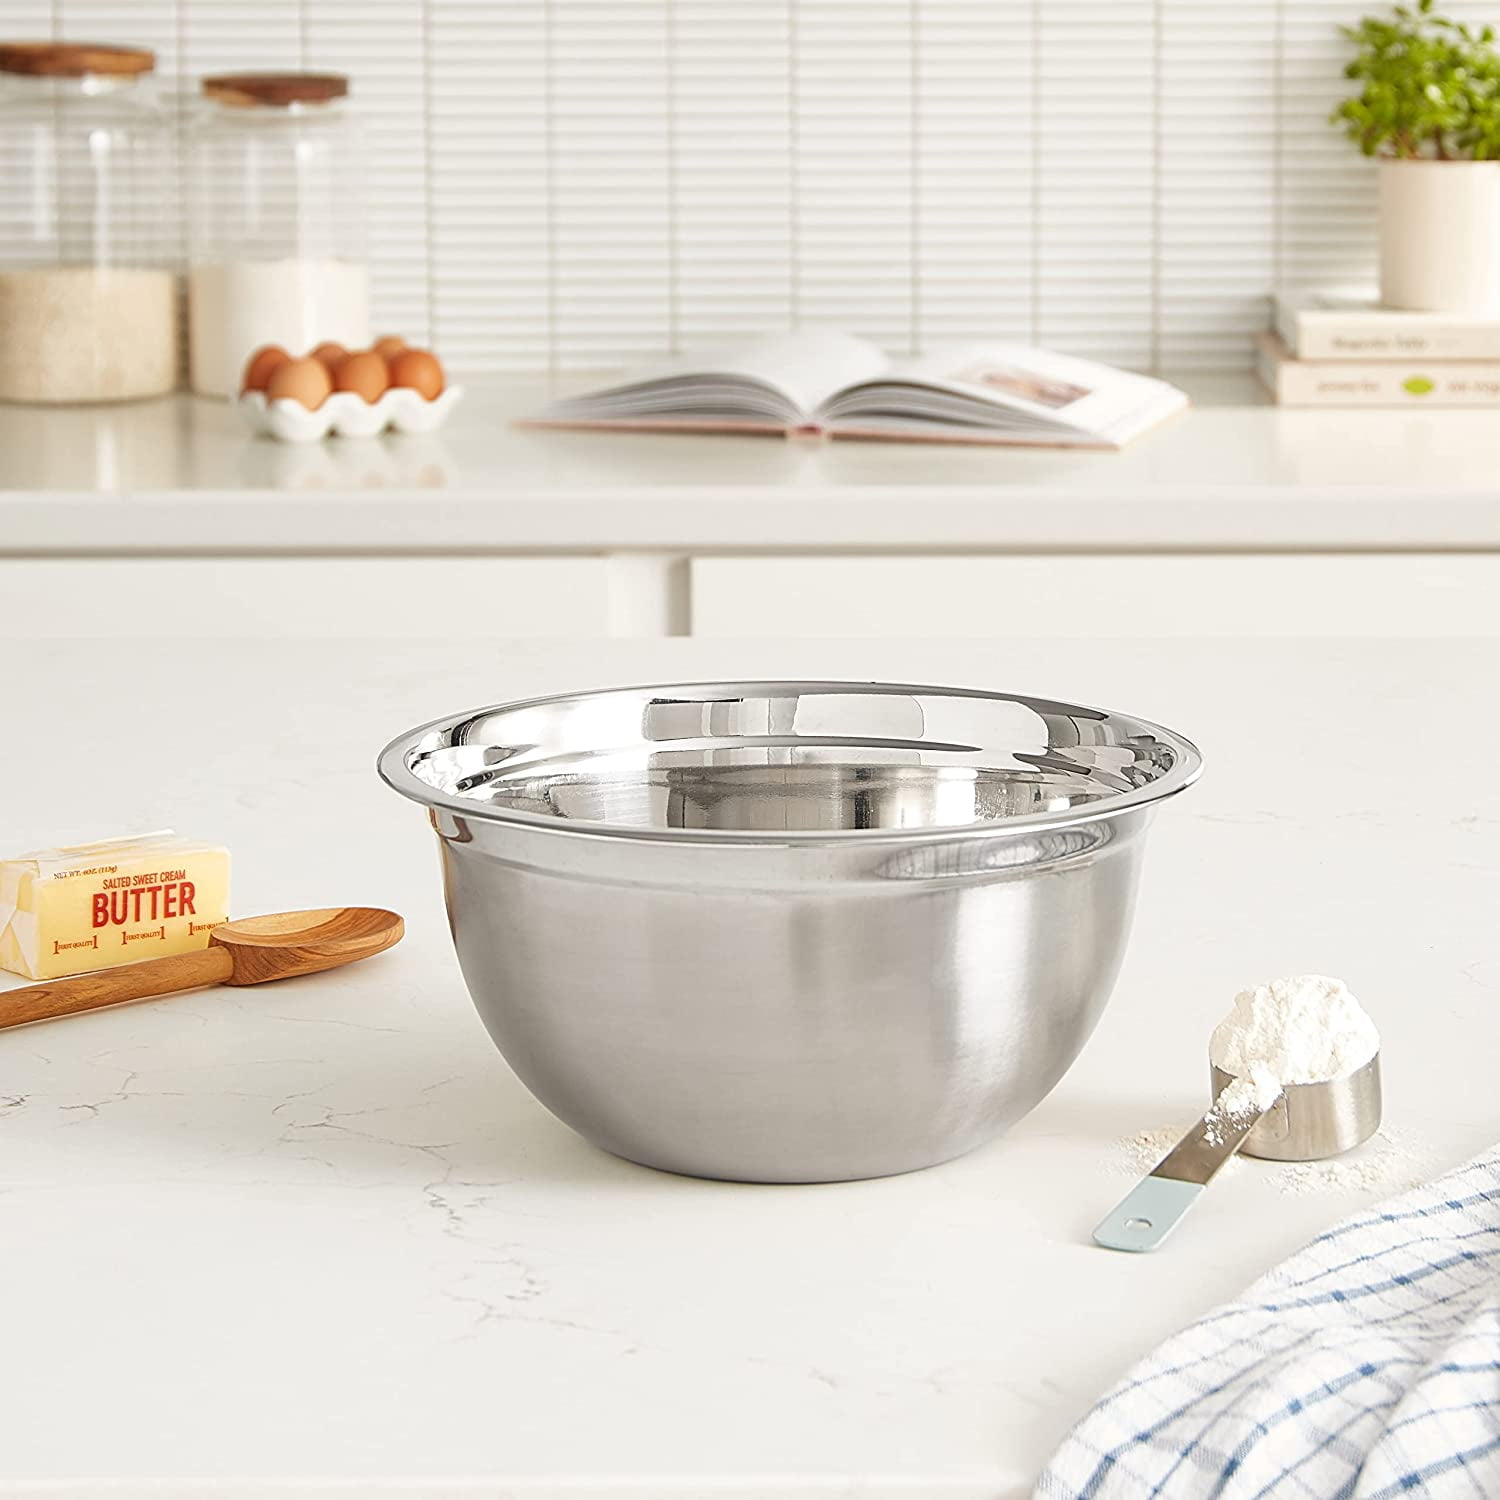 10.75 quart Stainless Steel Mixing Bowl - Whisk